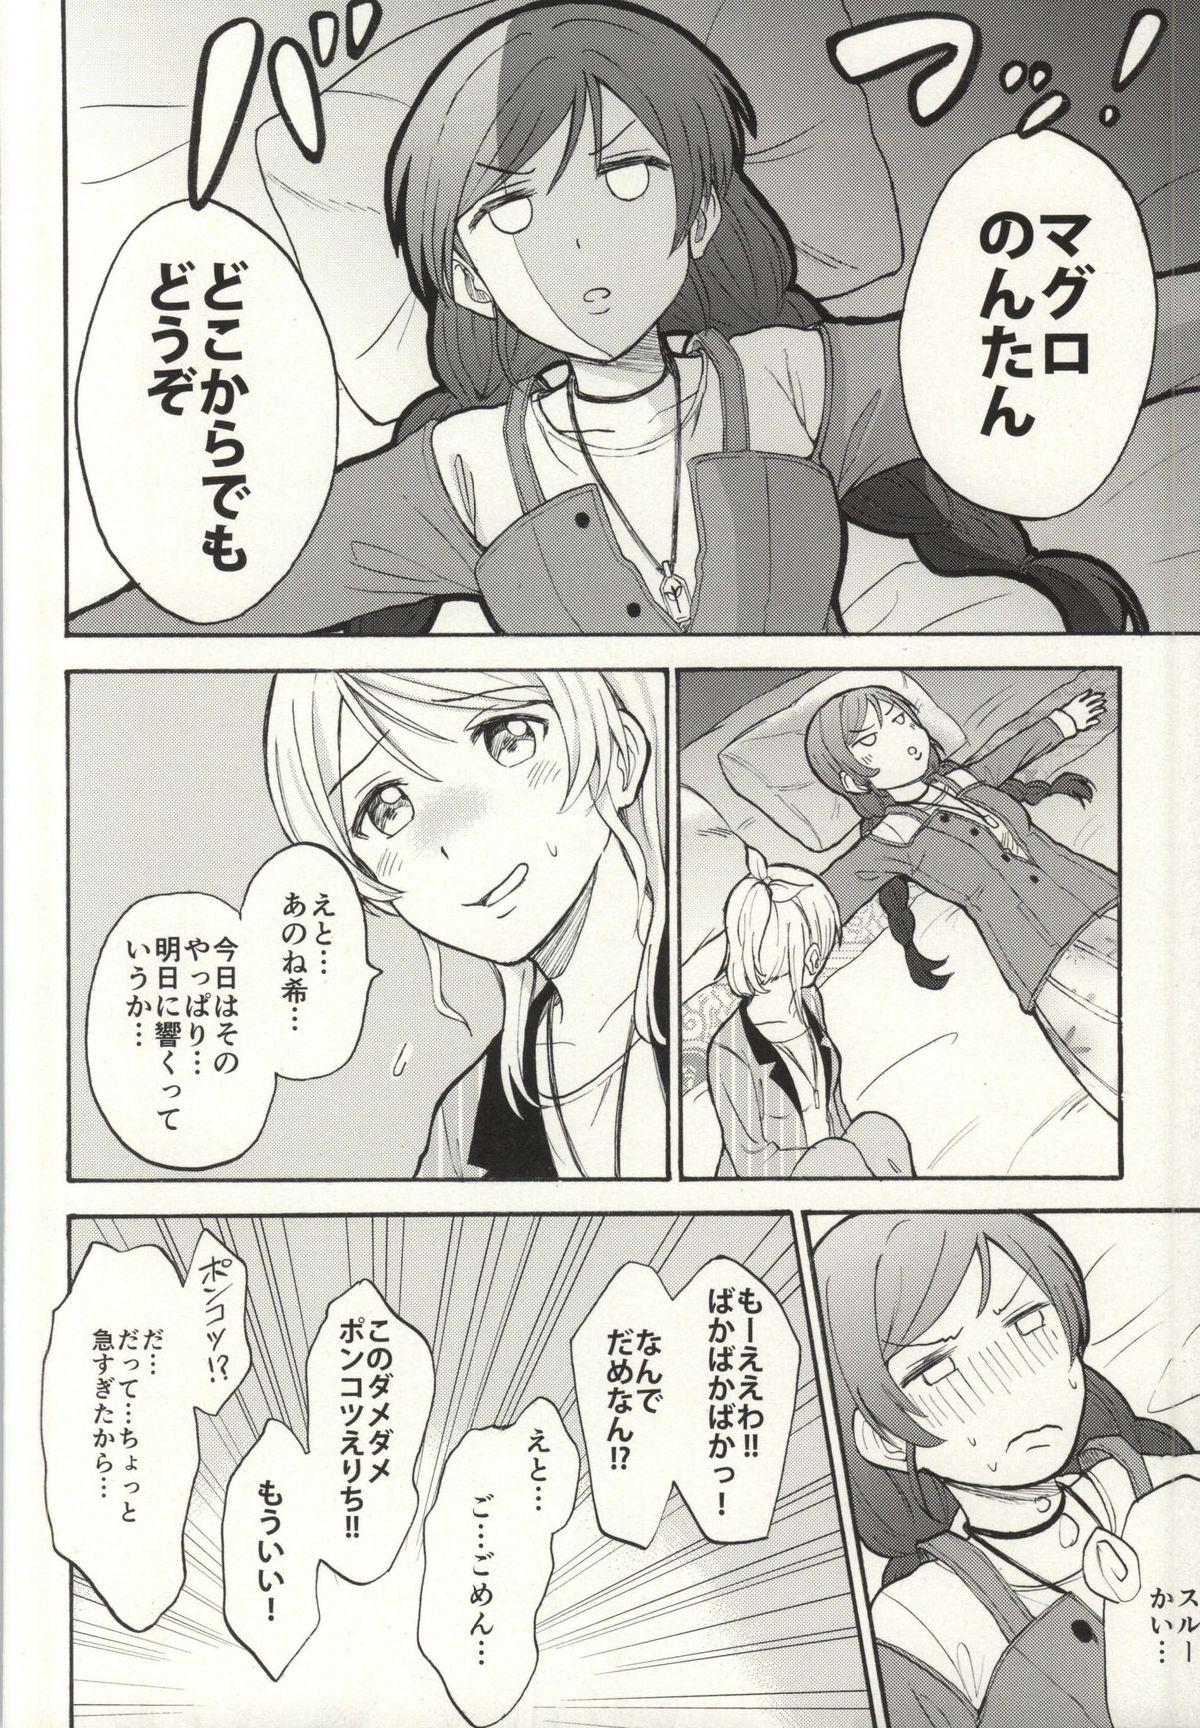 Cop Dame Dame! My Darling - Love live Doll - Page 12